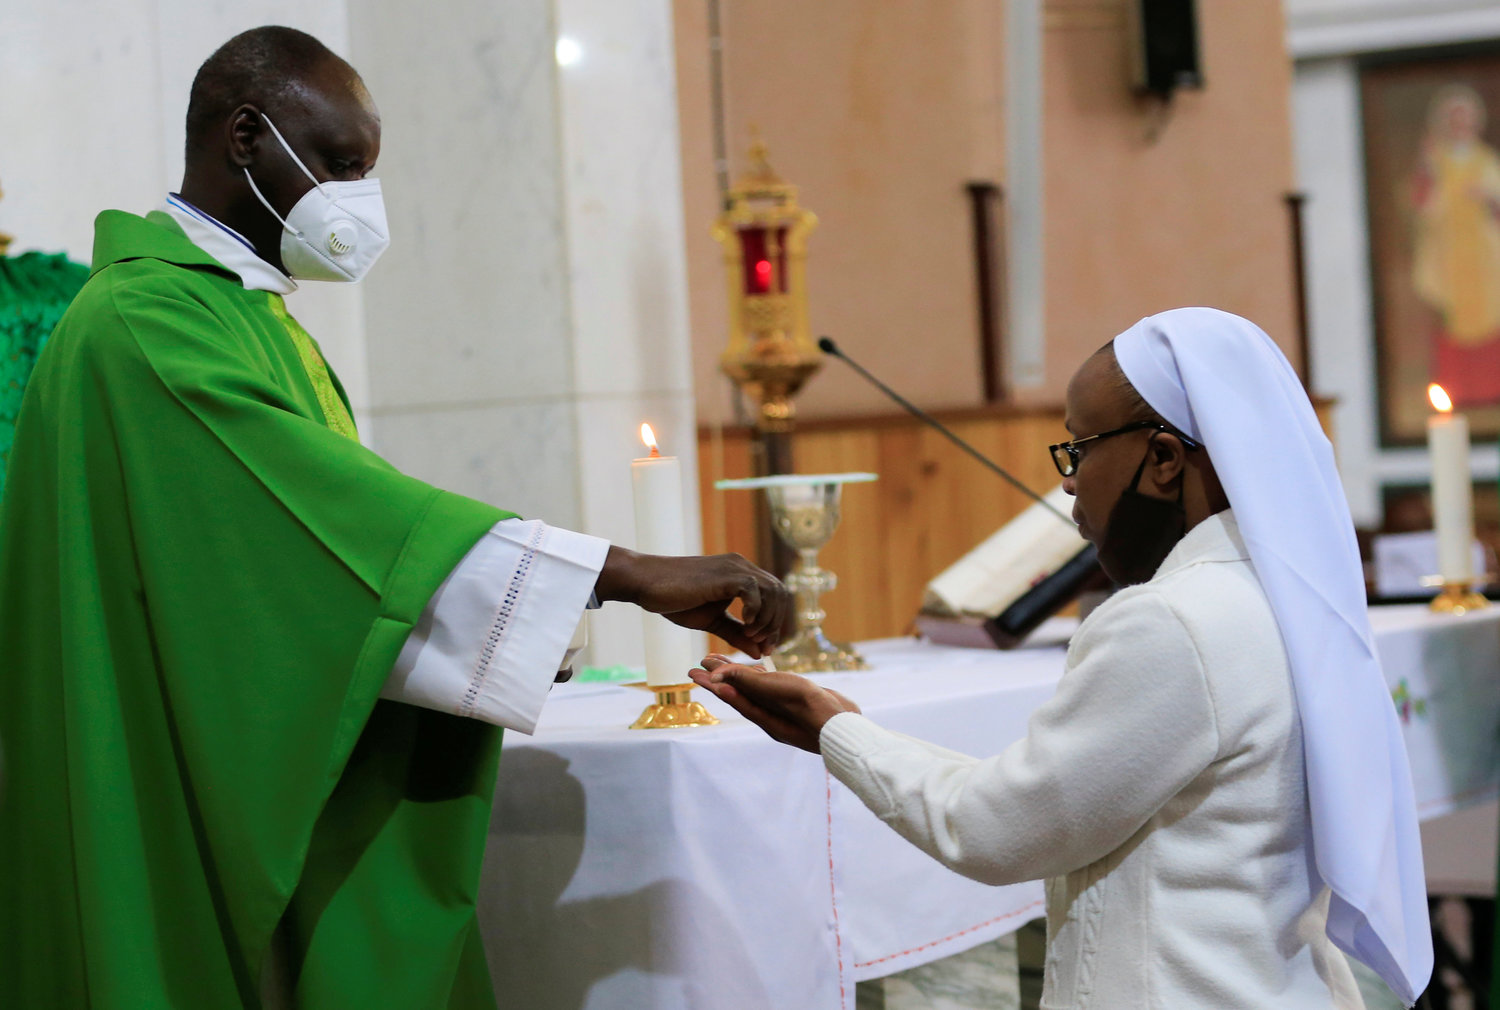 A priest wearing a face mask gives Communion to a woman religious during a July 19, 2020, Mass at the Cathedral Basilica of the Holy Family in Nairobi, Kenya, on the first day the government allowed churches to reopen for worship during the coronavirus pandemic. The Vatican issued a new instruction July 20 on pastoral care that emphasizes the role of lay men and women in the church's mission, but said most parishes must be led by priests.